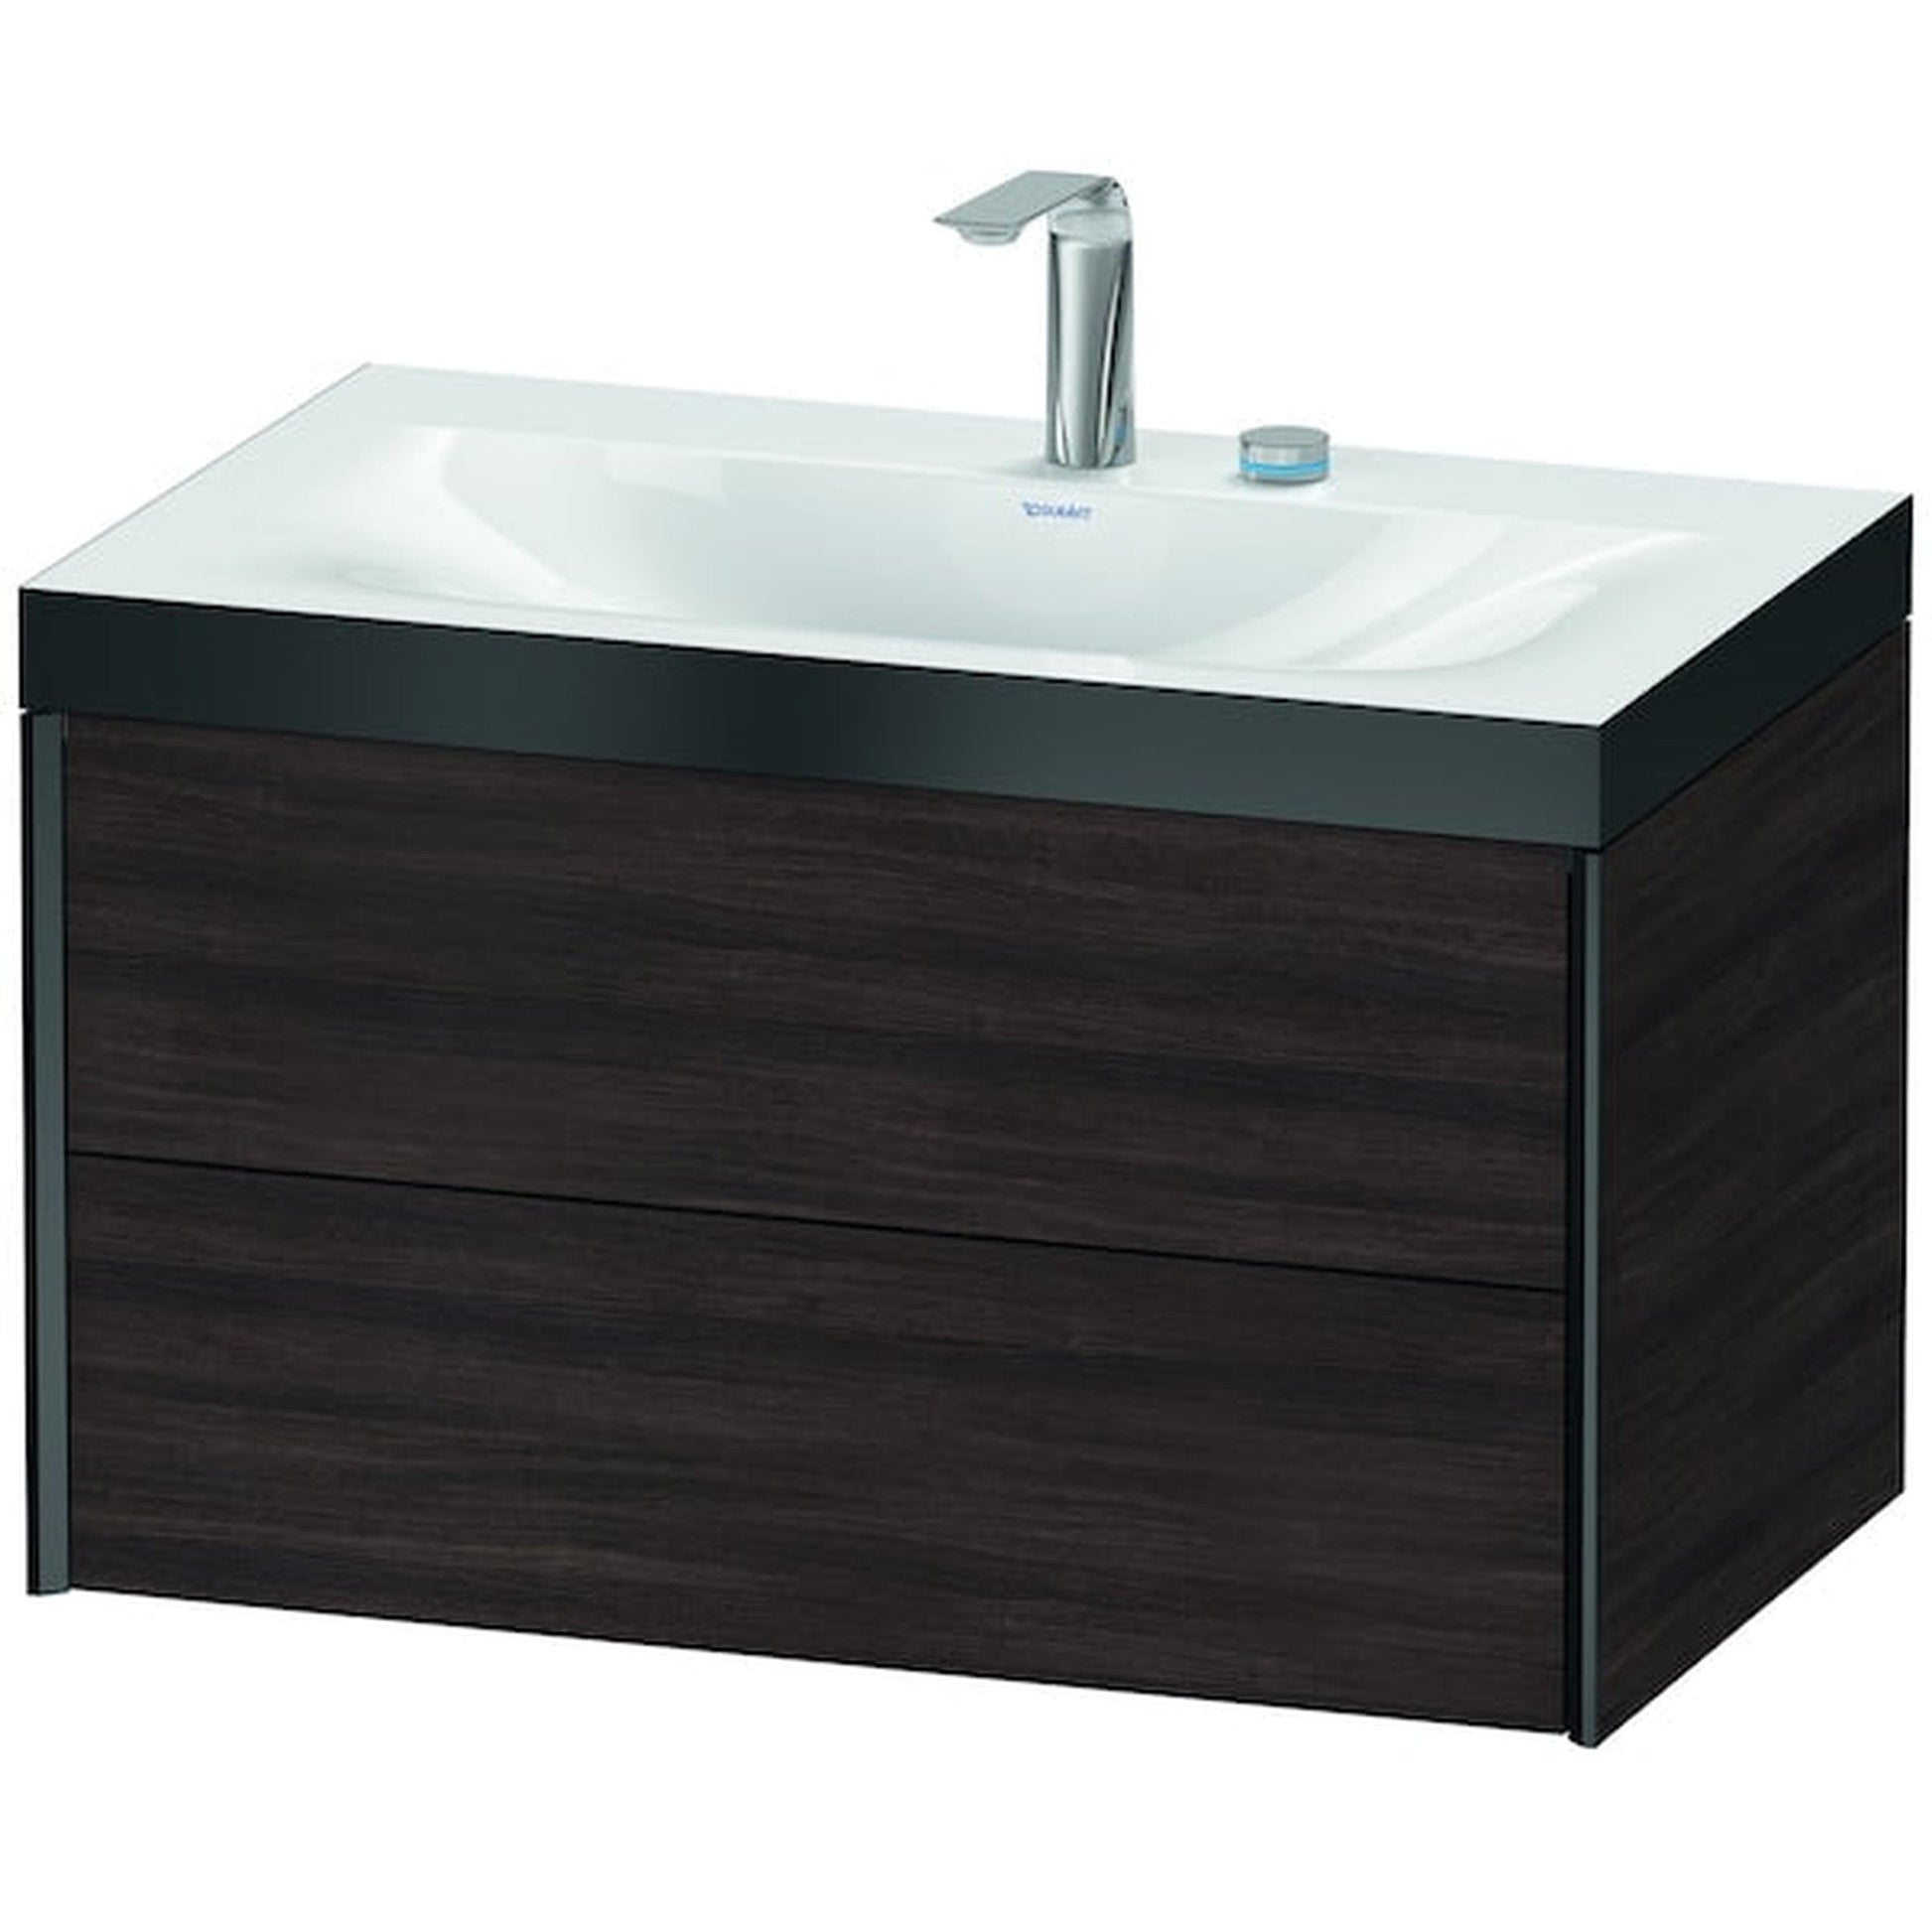 Duravit Xviu 31" x 20" x 19" Two Drawer C-Bonded Wall-Mount Vanity Kit With Two Tap Holes, Chestnut Dark (XV4615EB253P)